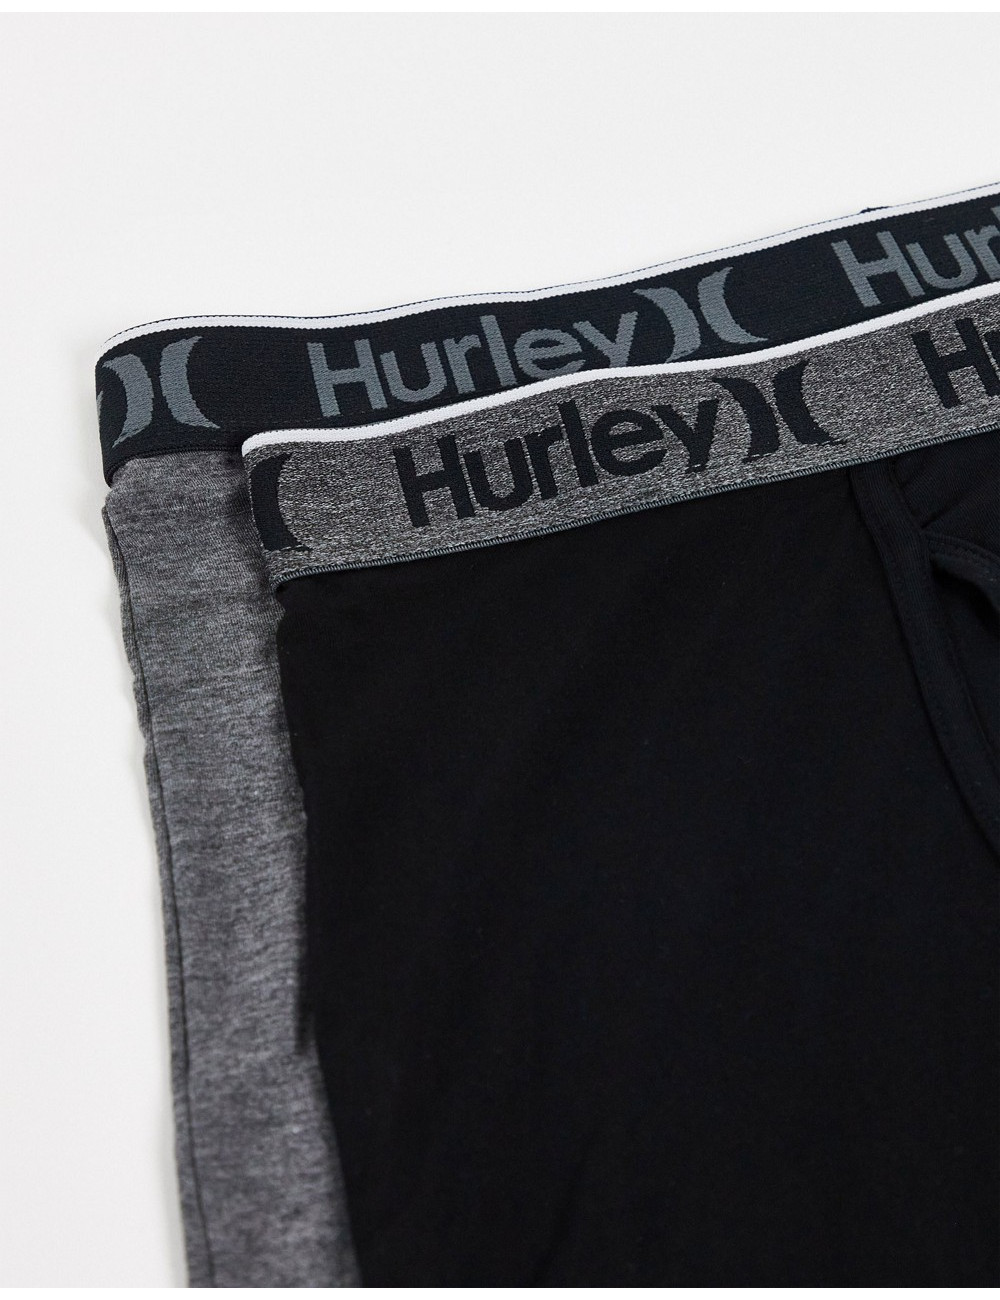 Hurley everyday 2 pack...